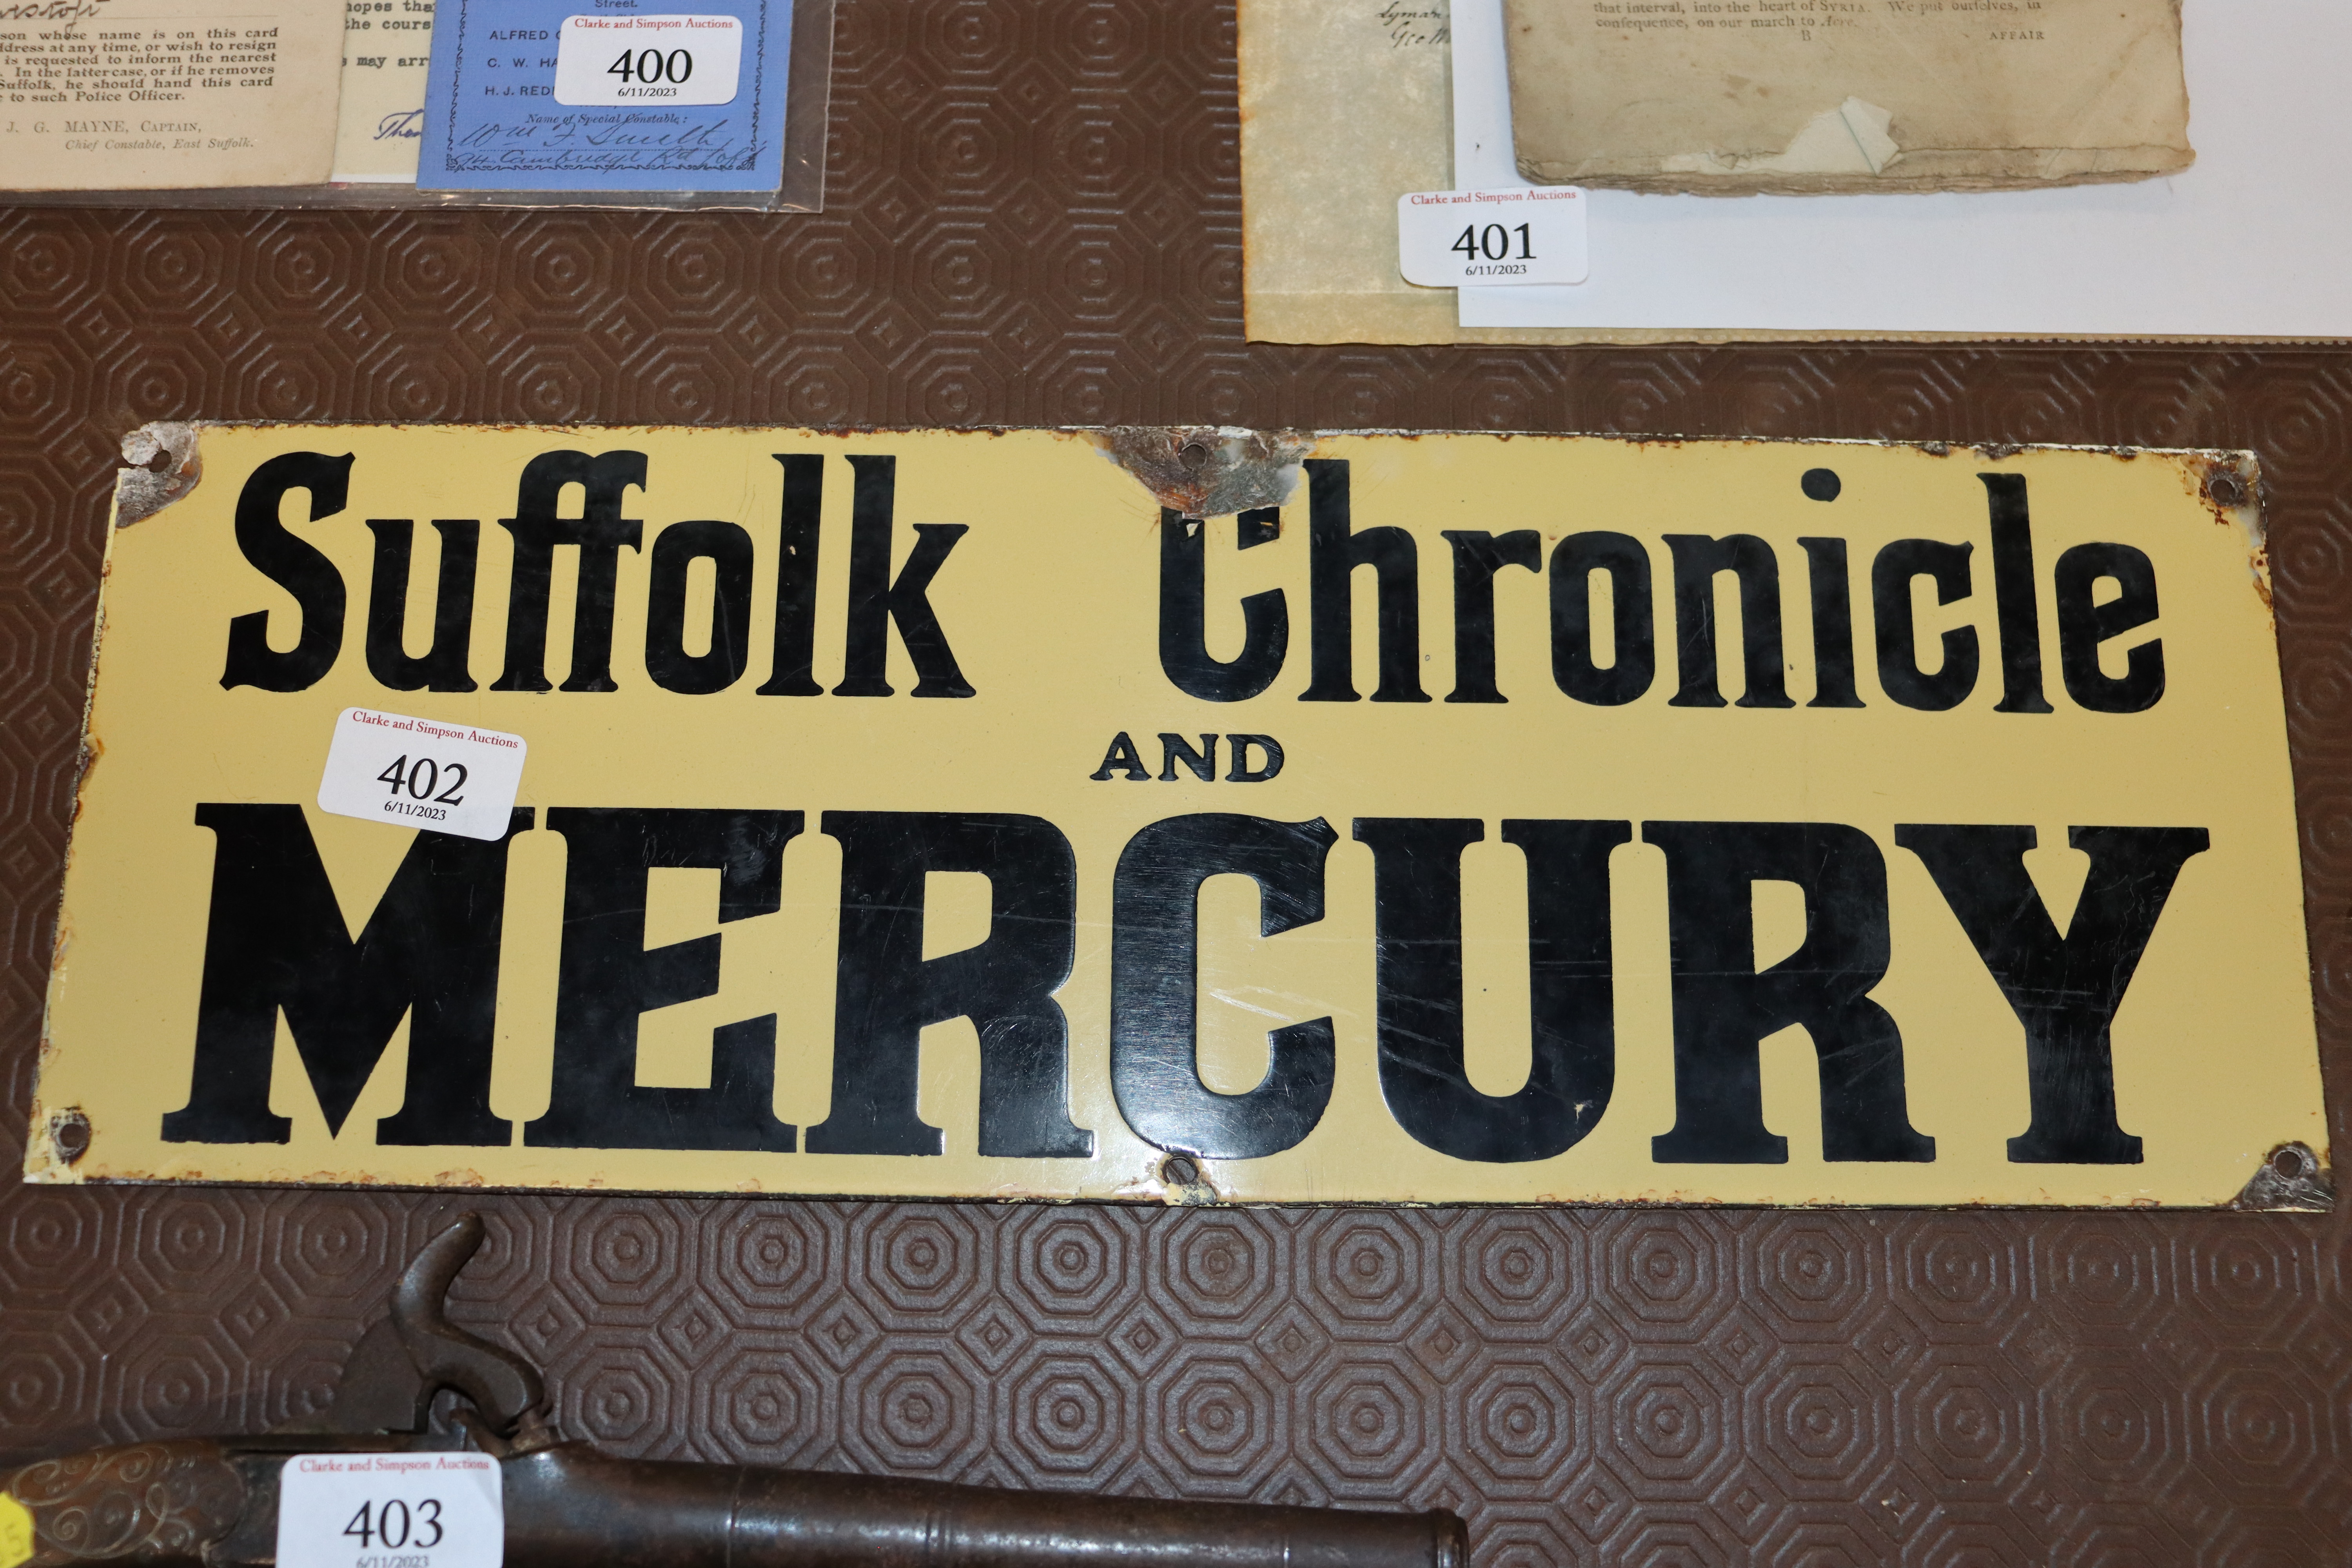 An enamel sign "Suffolk Chronicle and Mercury"